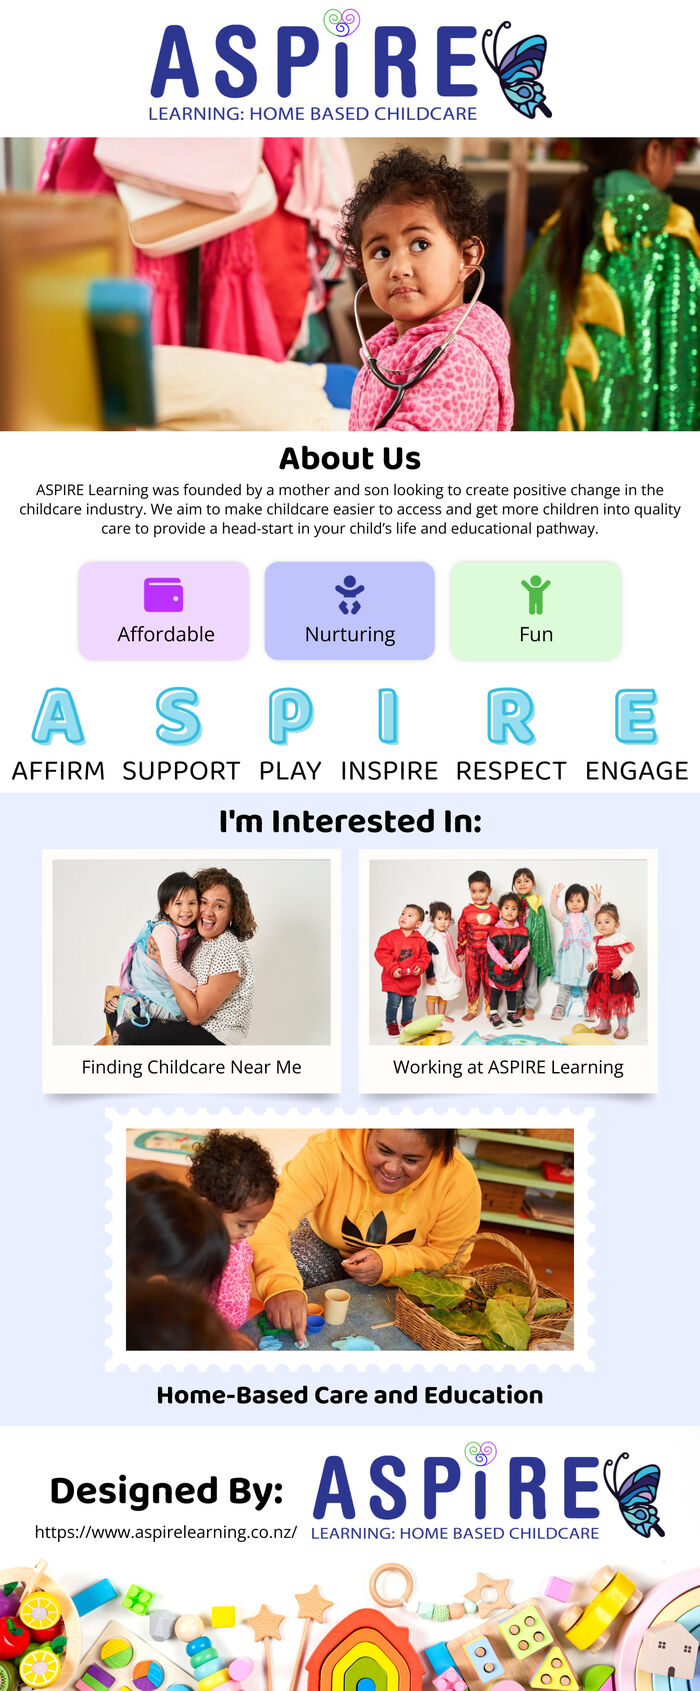 This infographic is designed by ASPIRE Learning: Home Based Childcare